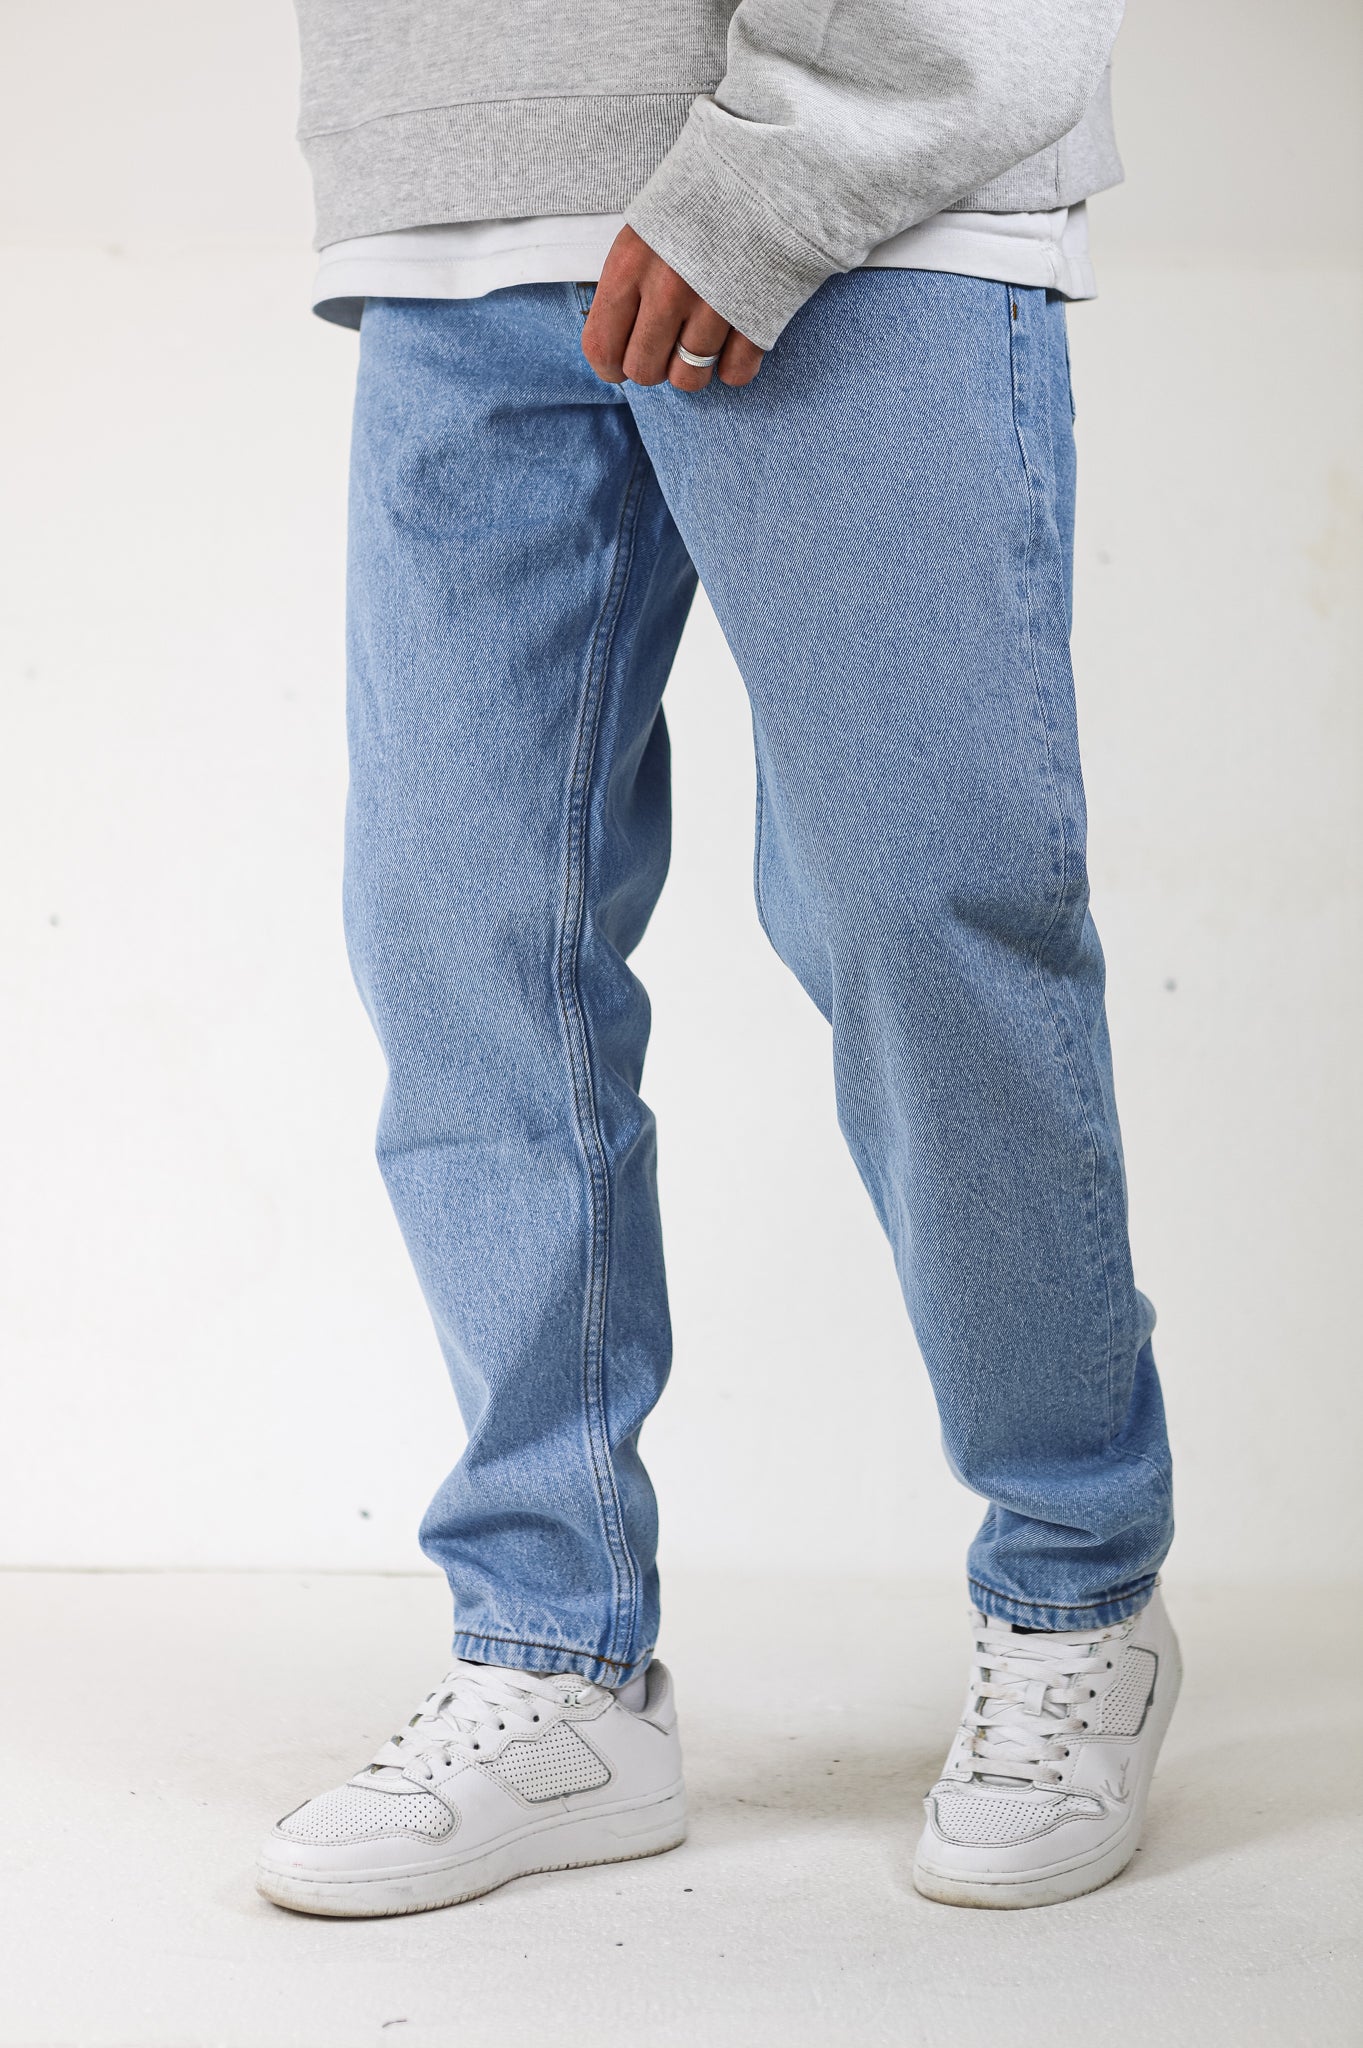 Premium Relaxed Fit Light Blue Basic Jeans - UNEFFECTED STUDIOS® - JEANS - UNEFFECTED STUDIOS®